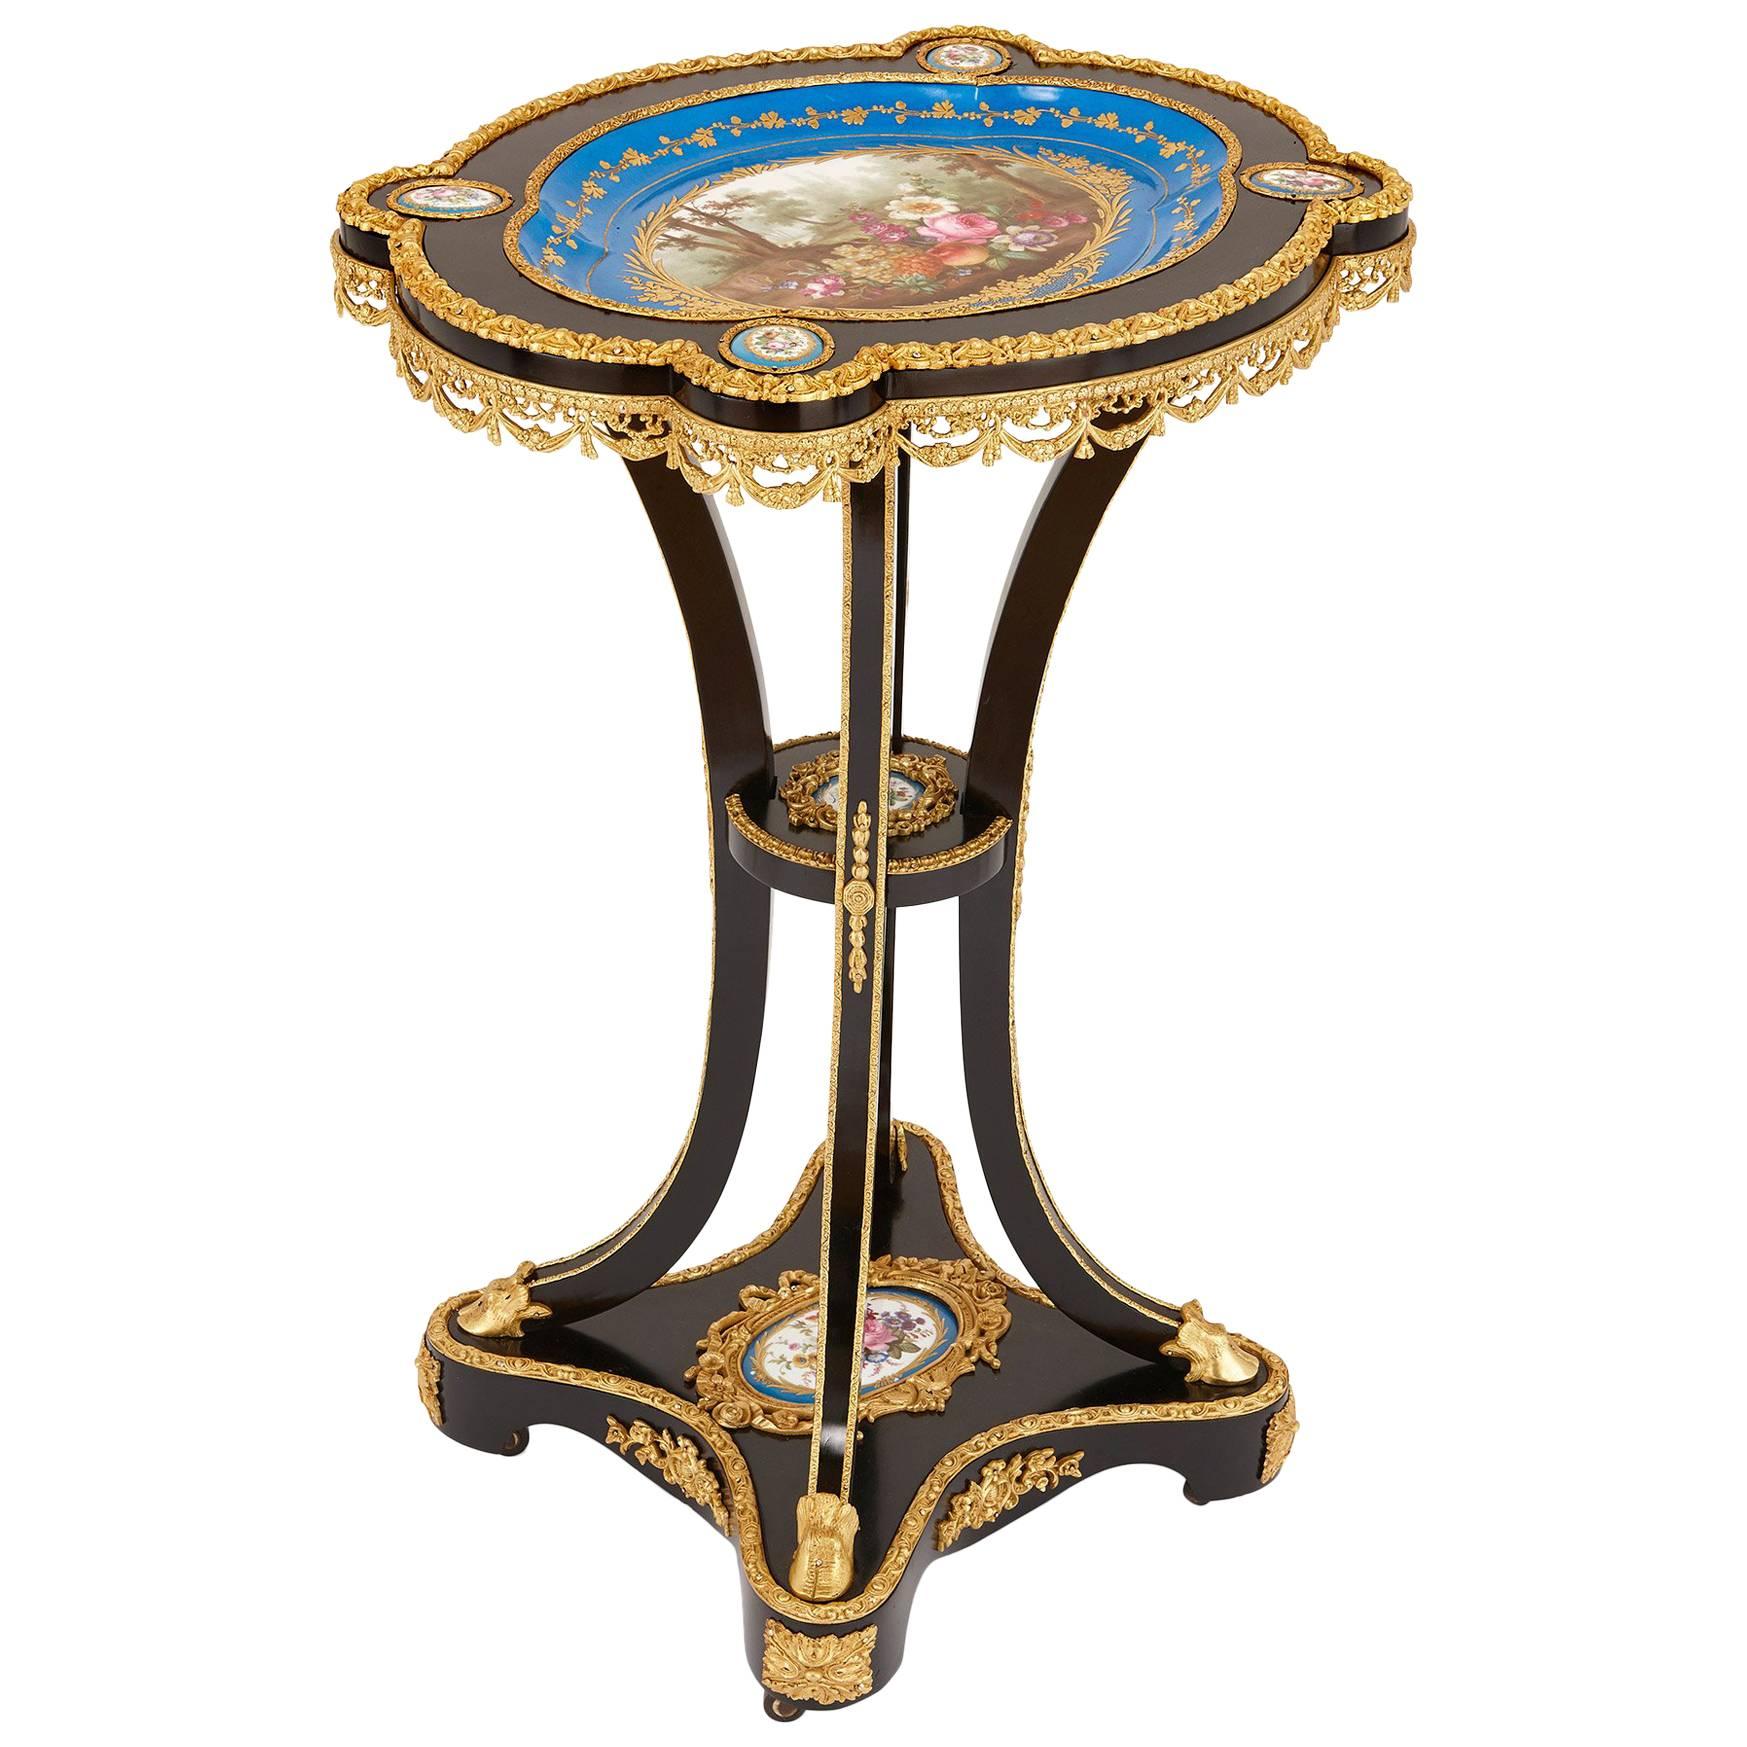 Ormolu-Mounted Sèvres Porcelain and Ebonized Wood Side Table For Sale